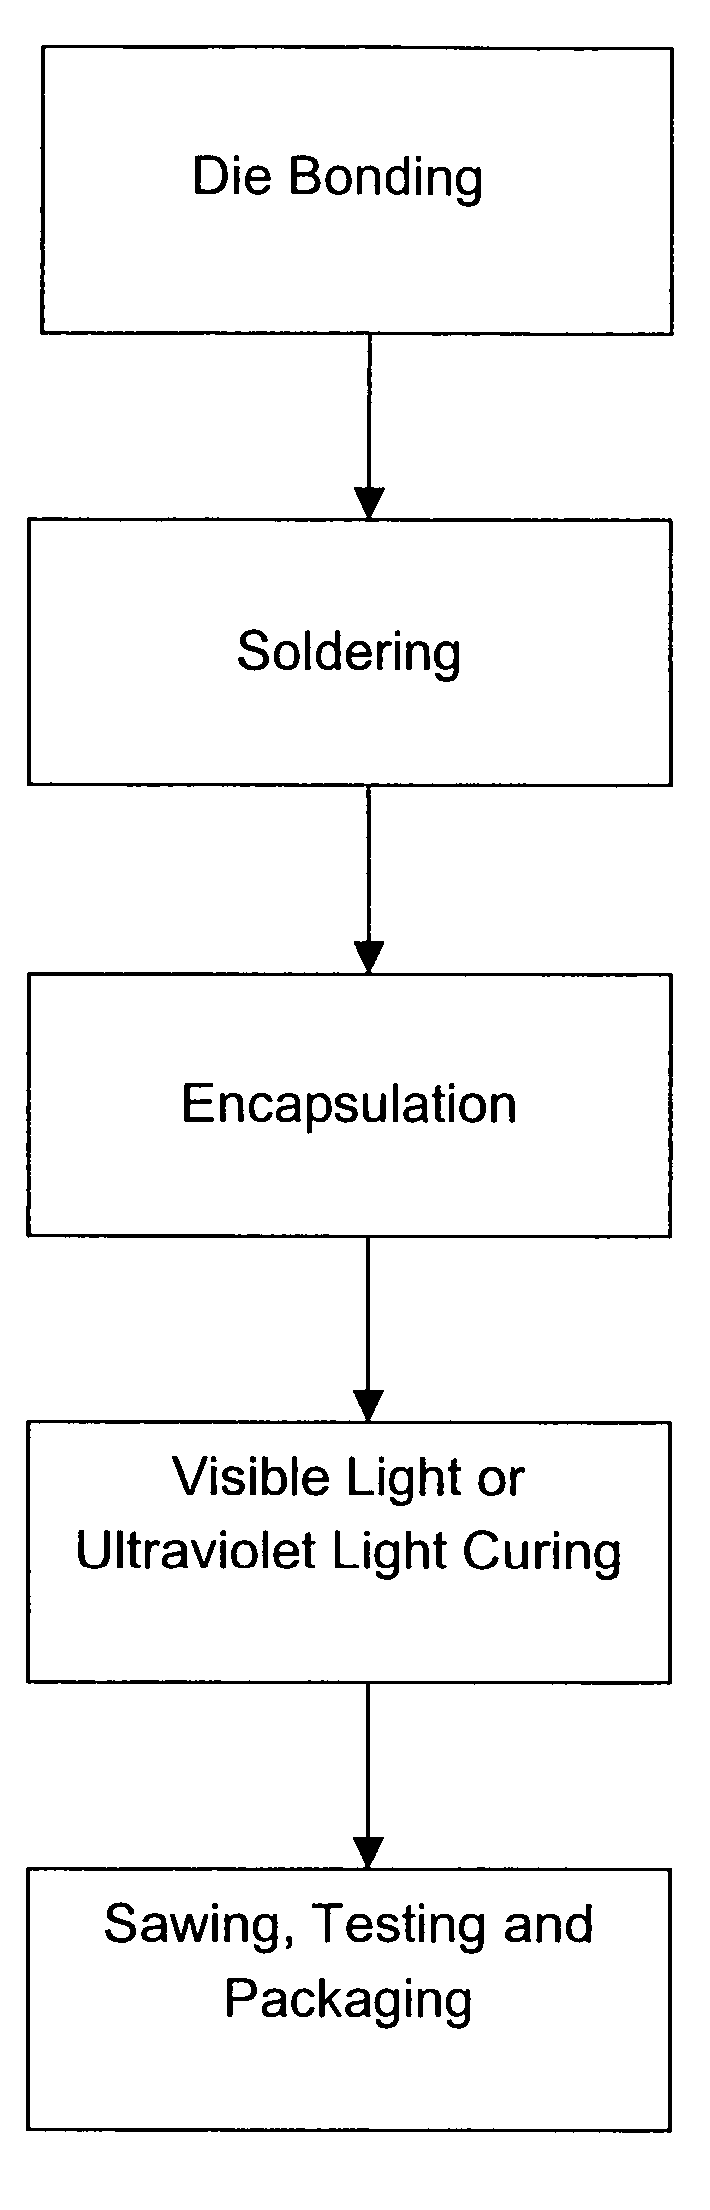 Light-emitting diode encapsulation material and manufacturing process